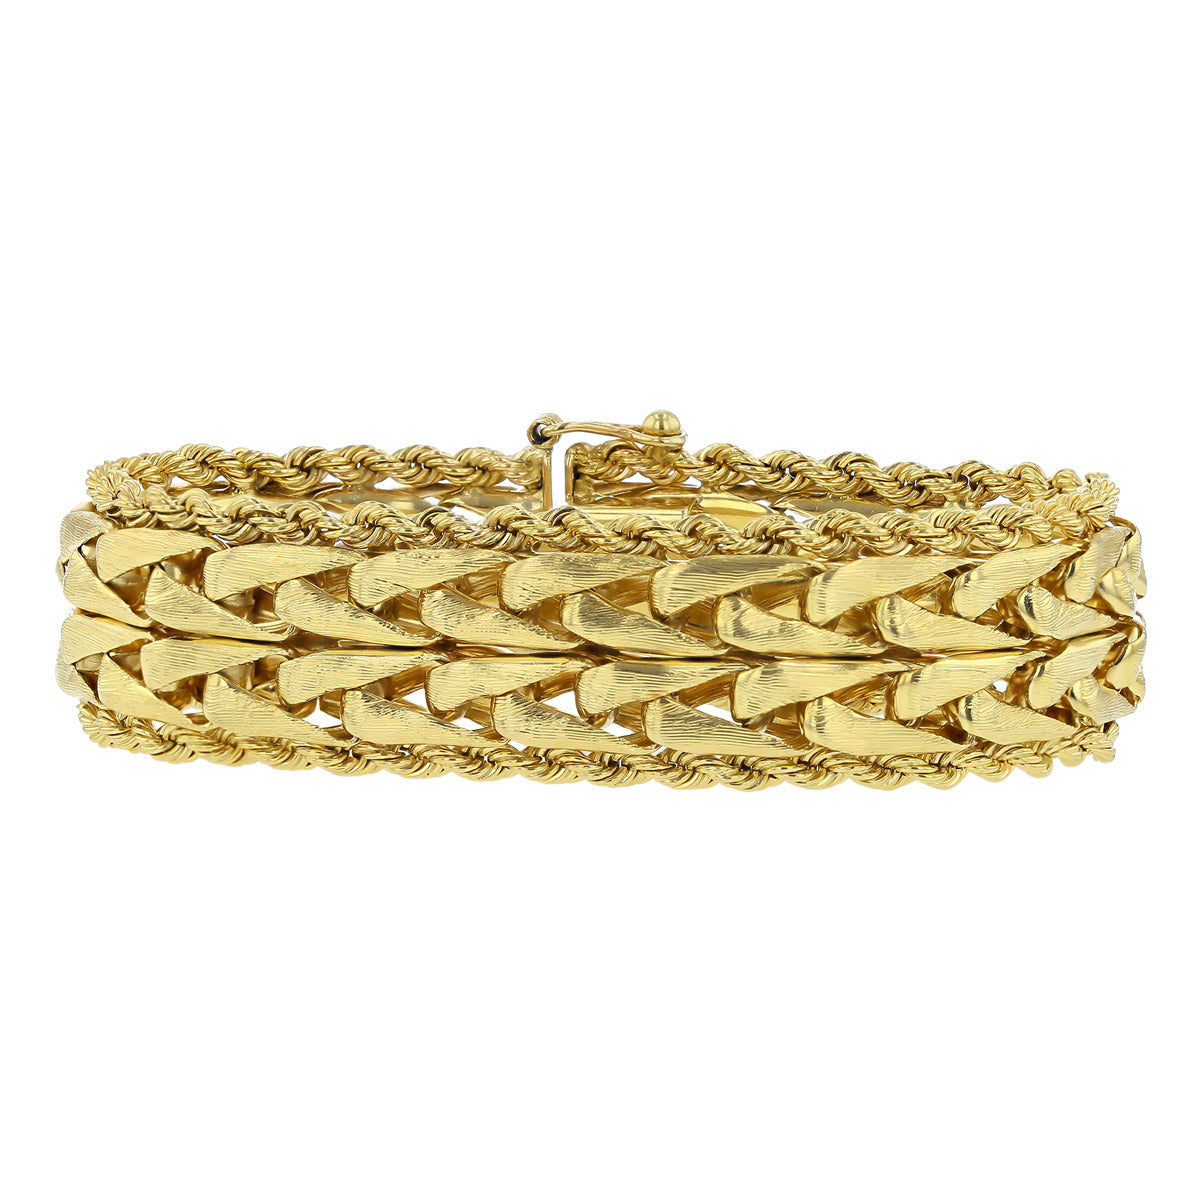 Twisted Gold Bracelet | Posh Totty Designs | Wolf & Badger